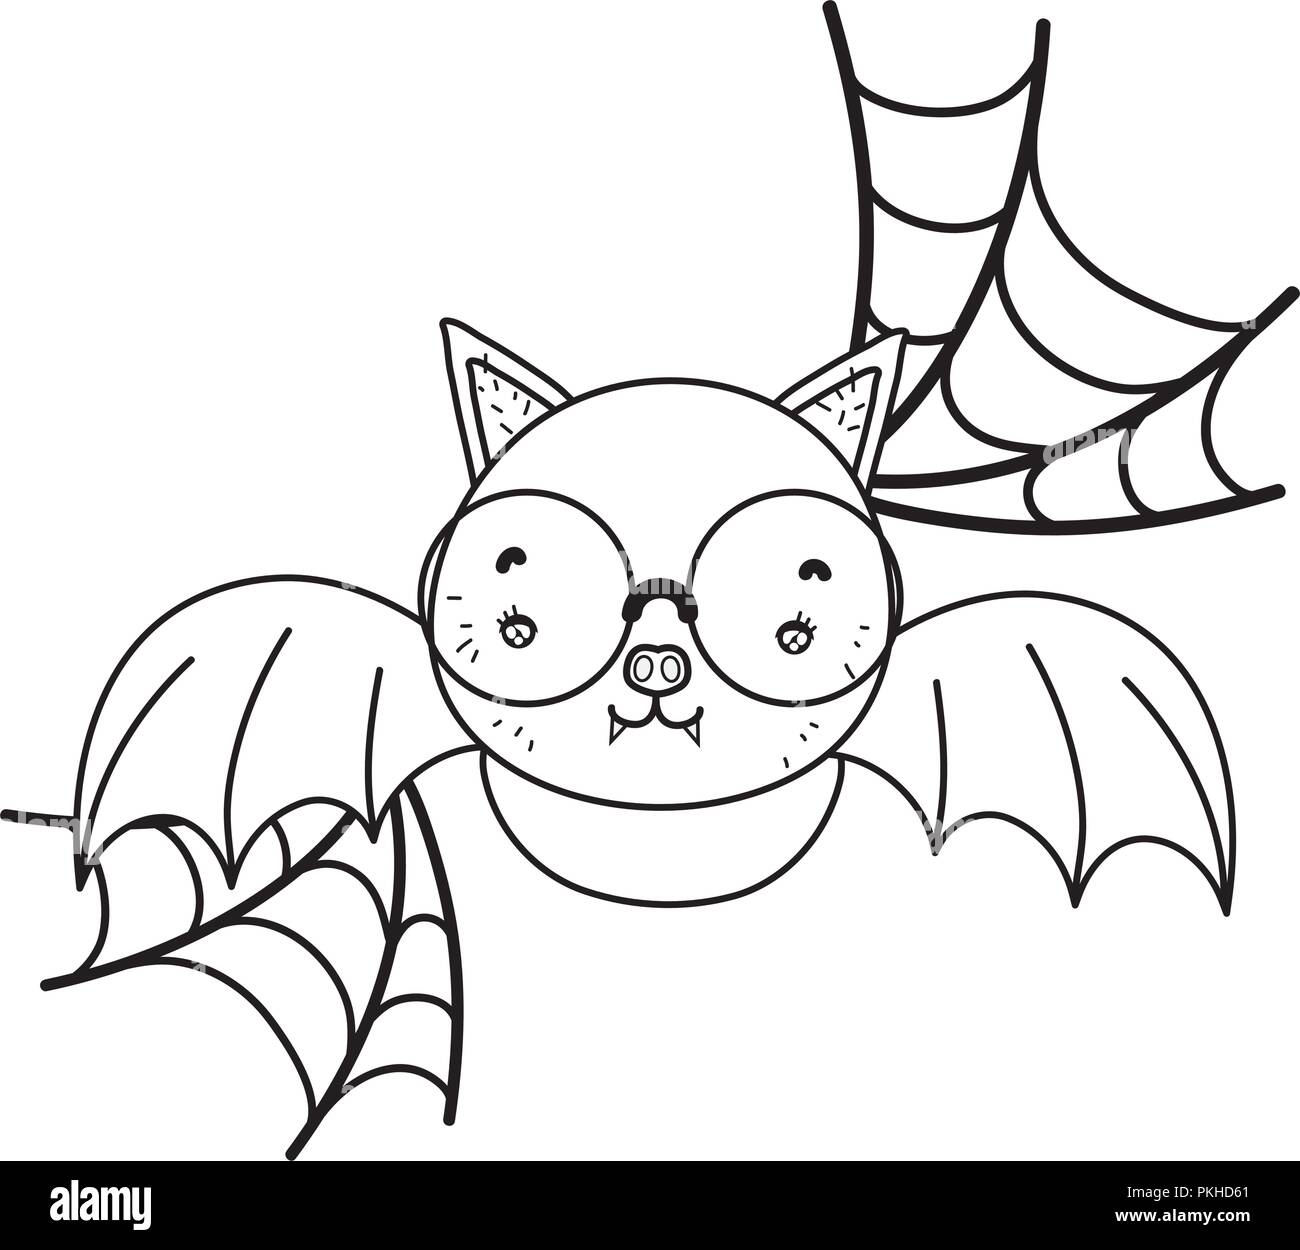 outline bat flying wearing glasses and spiderweb Stock Vector